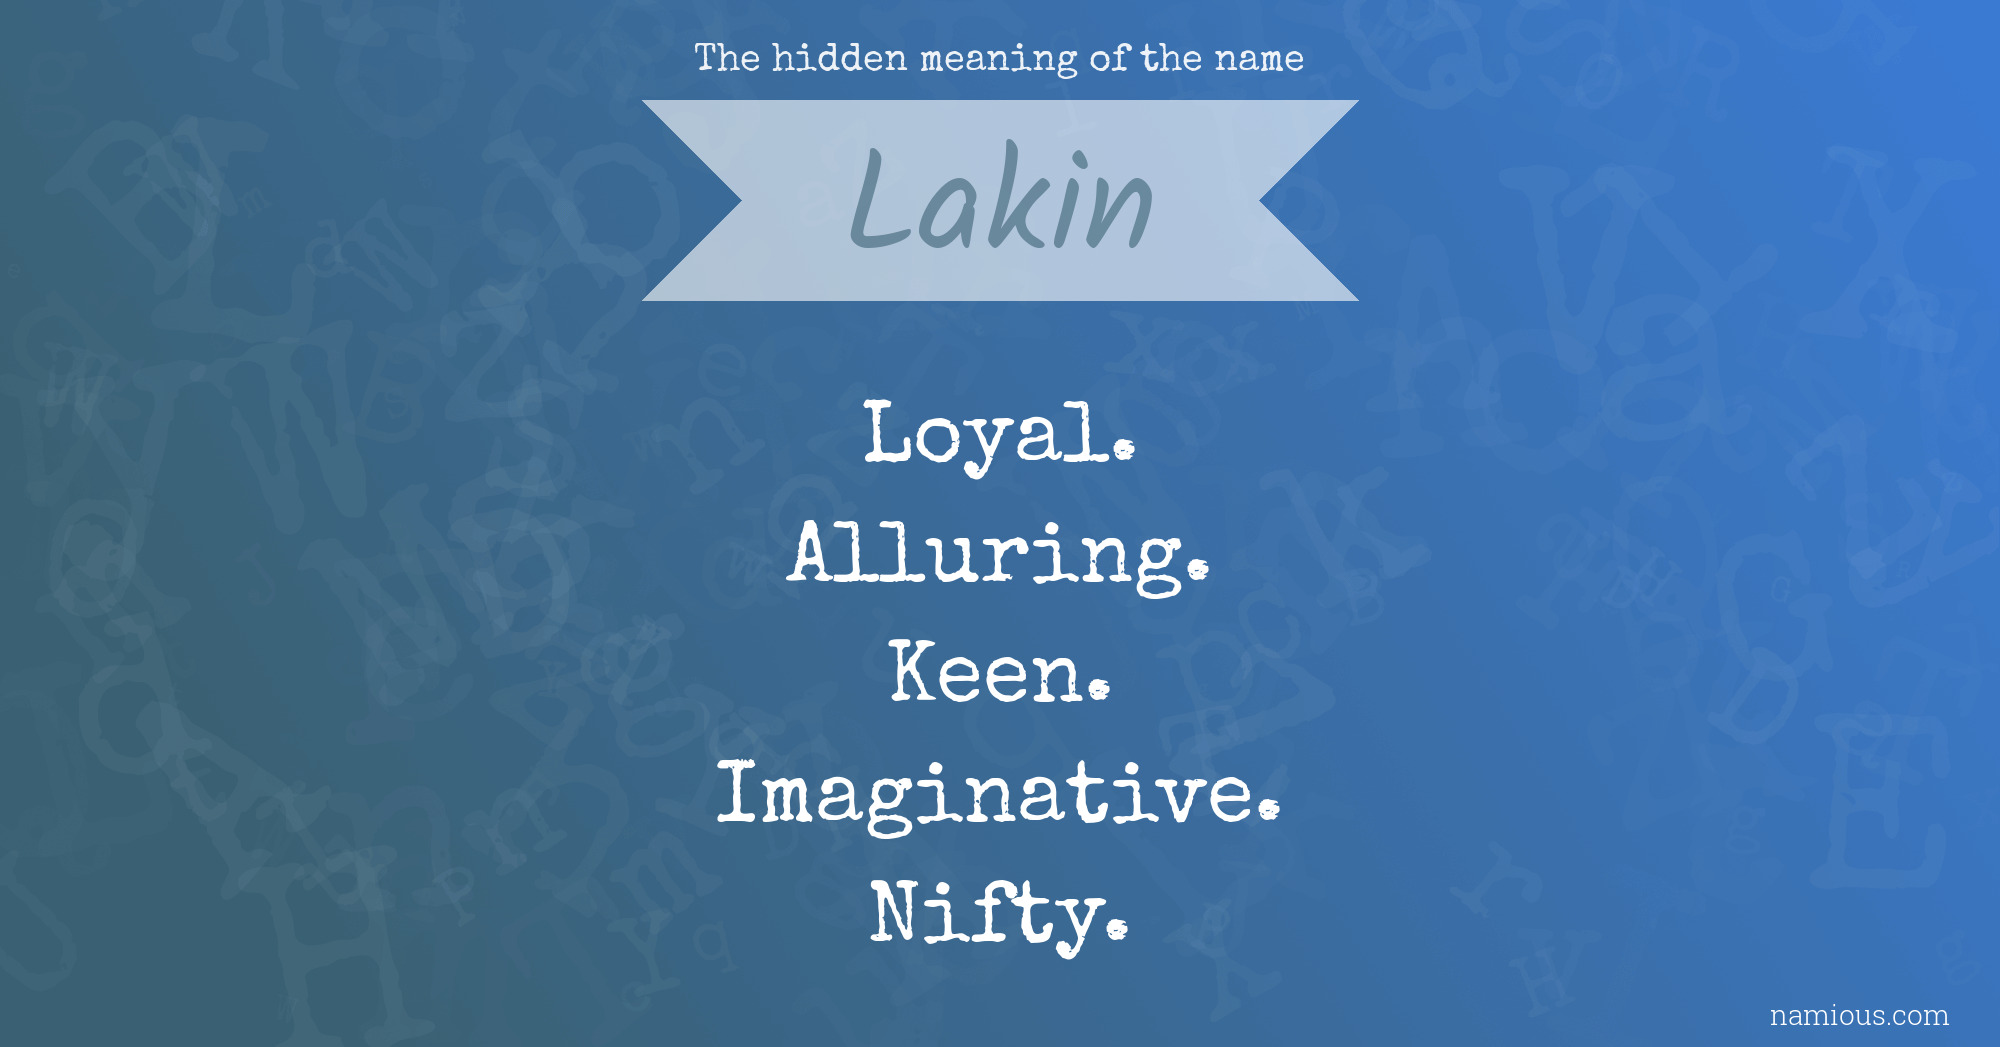 The hidden meaning of the name Lakin